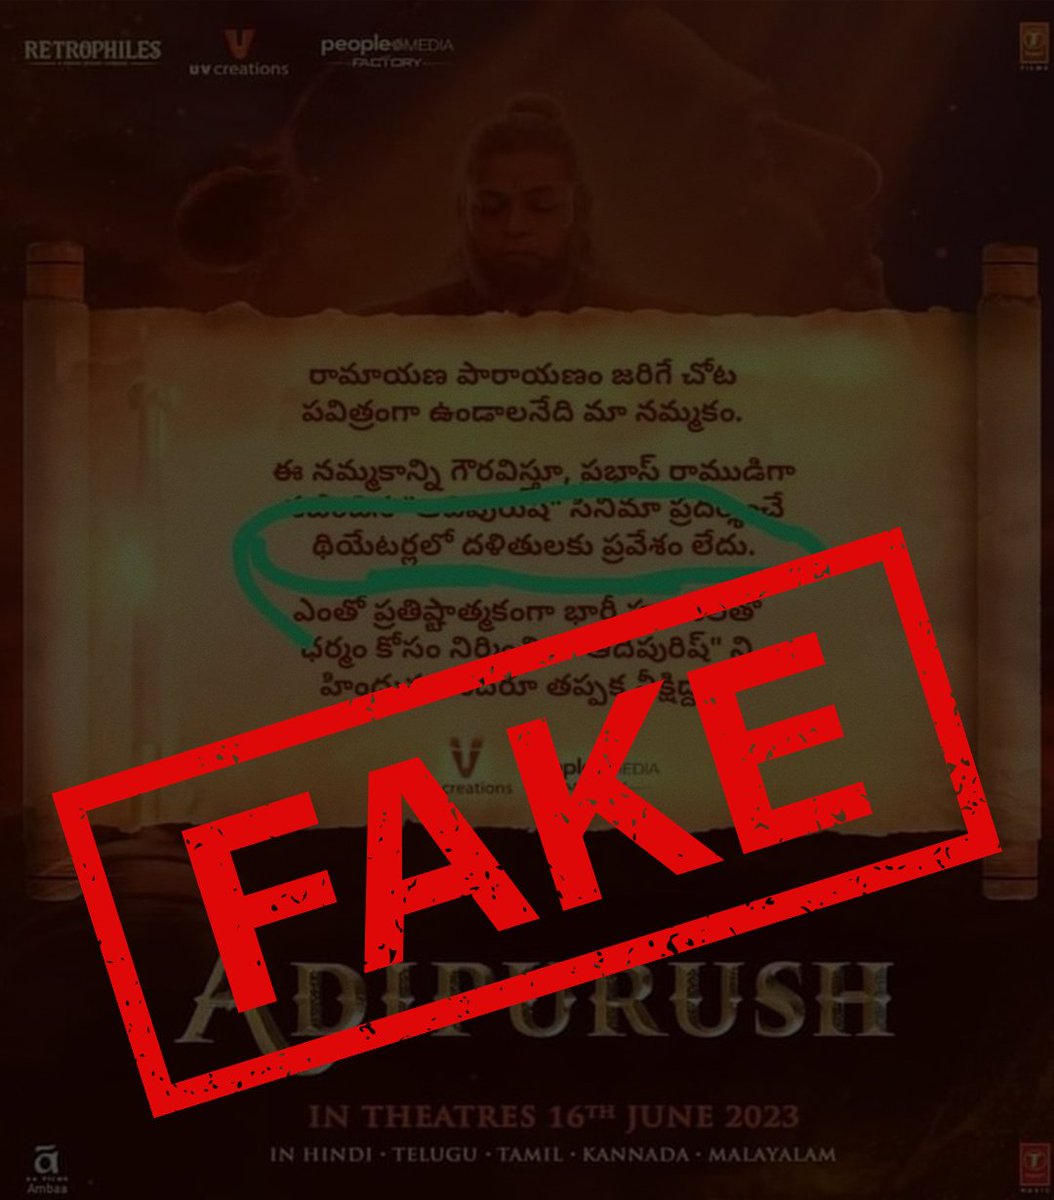 📢 Attention: The statements made in the #Adipurush Picture are false and misleading!

Team Adipurush firmly stands for Equality, emphasizing no discrimination based on caste, colour or creed.

Help us combat this evil by reporting it wherever you encounter it! 🙏